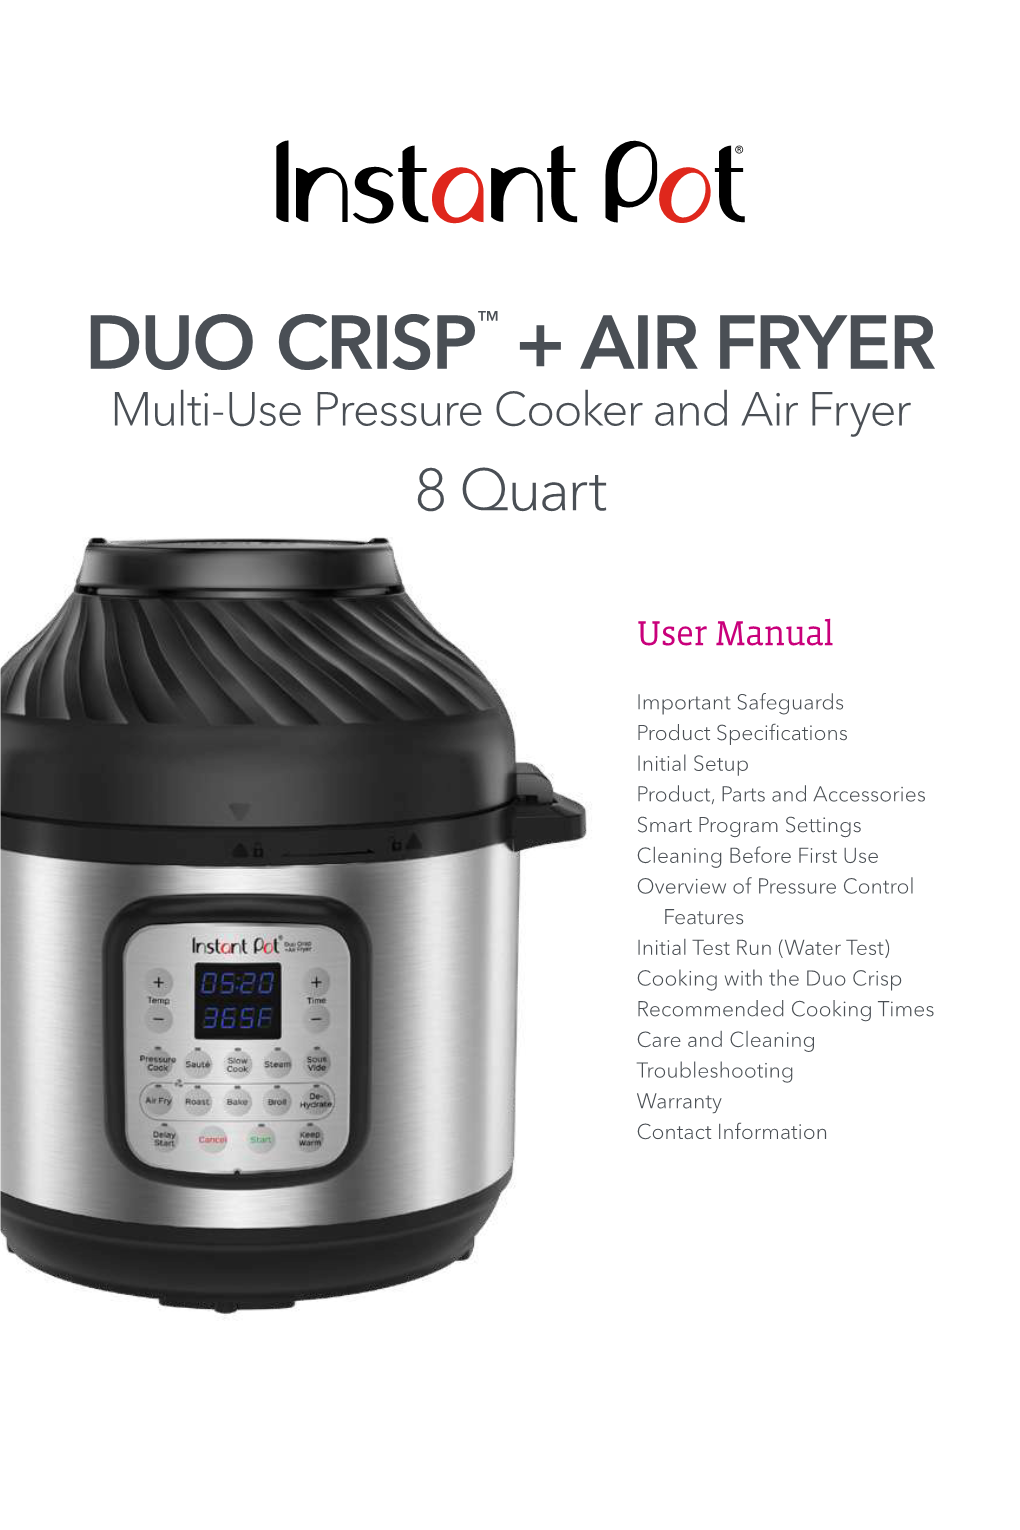 Duo Crisp + Air Fryer 8 Quart Before Using the Instant Pot Duo Crisp, Verify That All Parts Are Accounted For